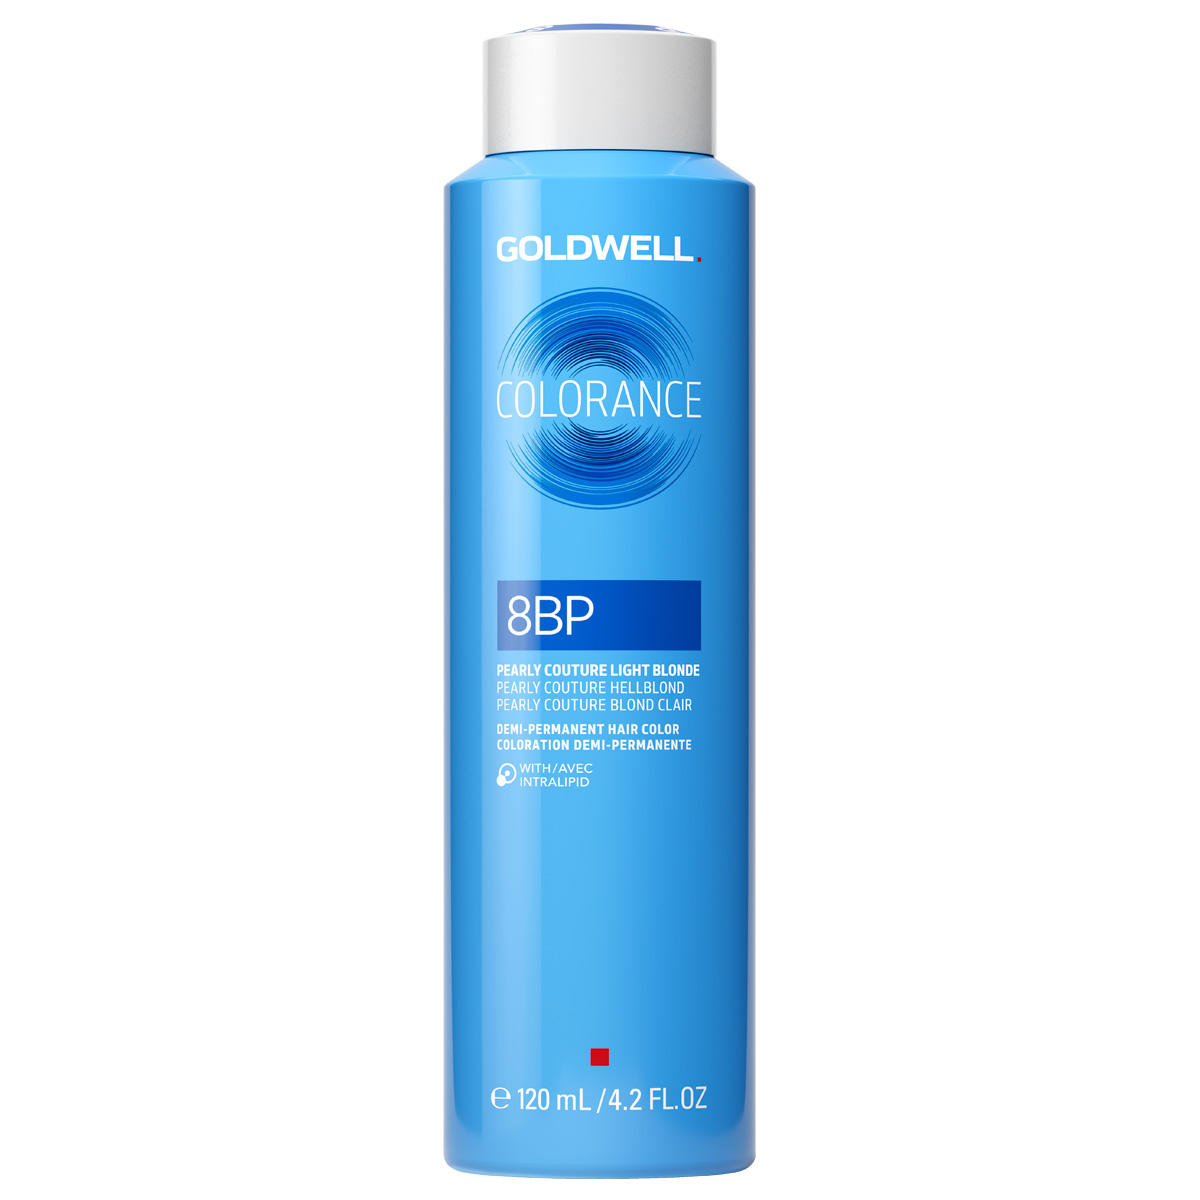 Goldwell Colorance Demi-Permanent Hair Color 8BP Couture Hellblond 120 ml - 1